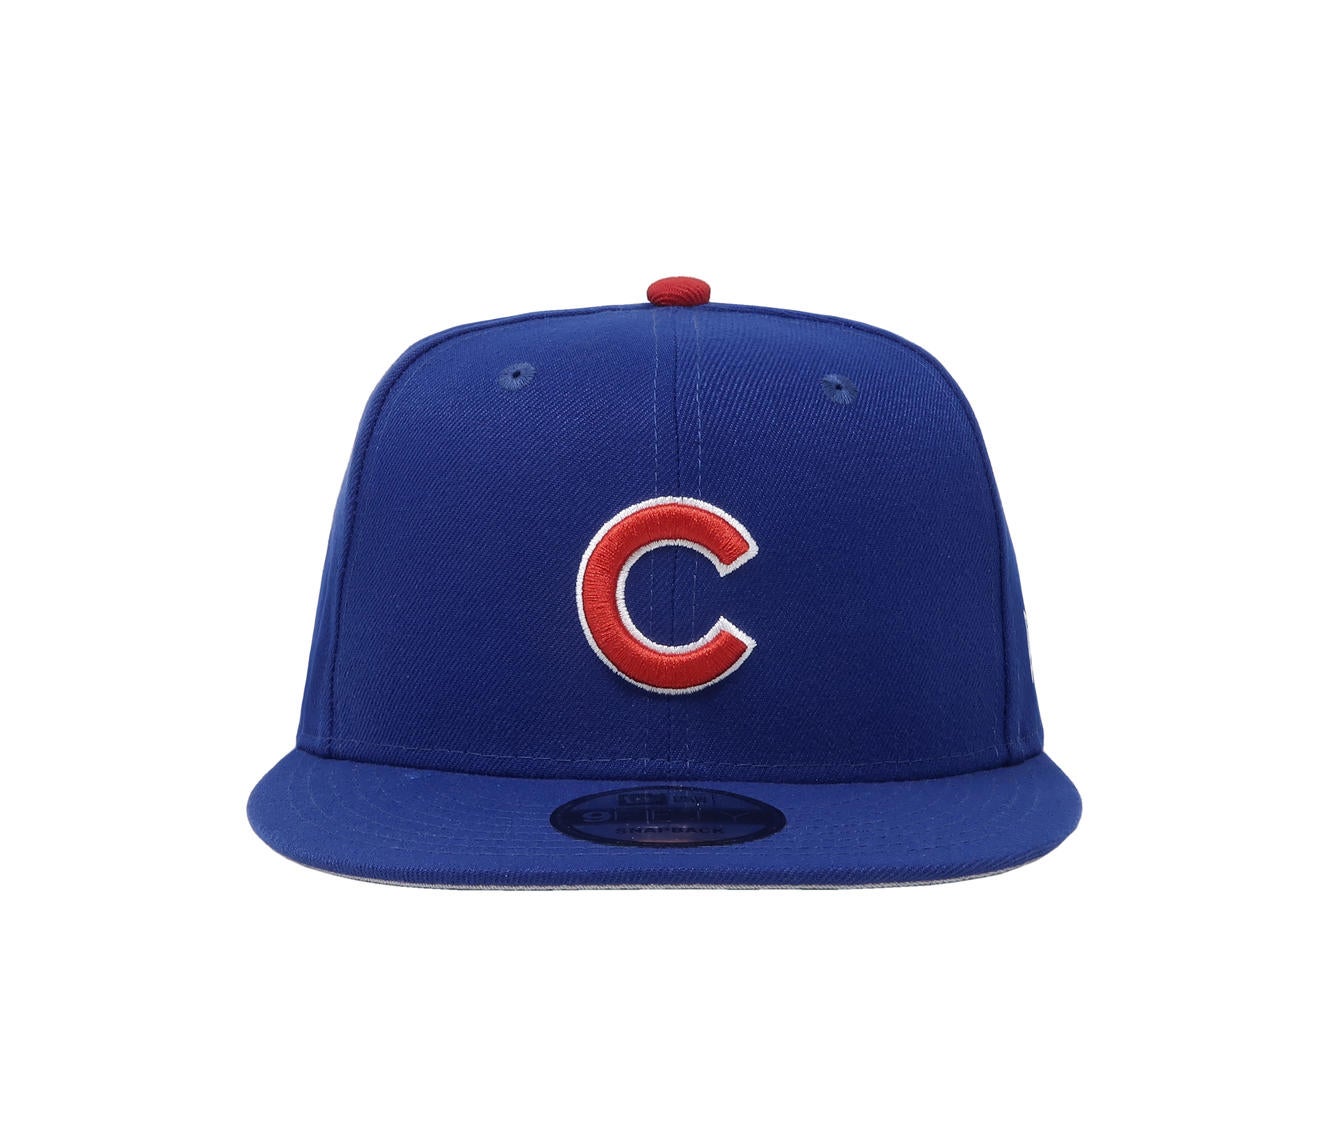 New Era 9Fifty Chicago Cubs Metal Thread Snapback Hat Royal Blue